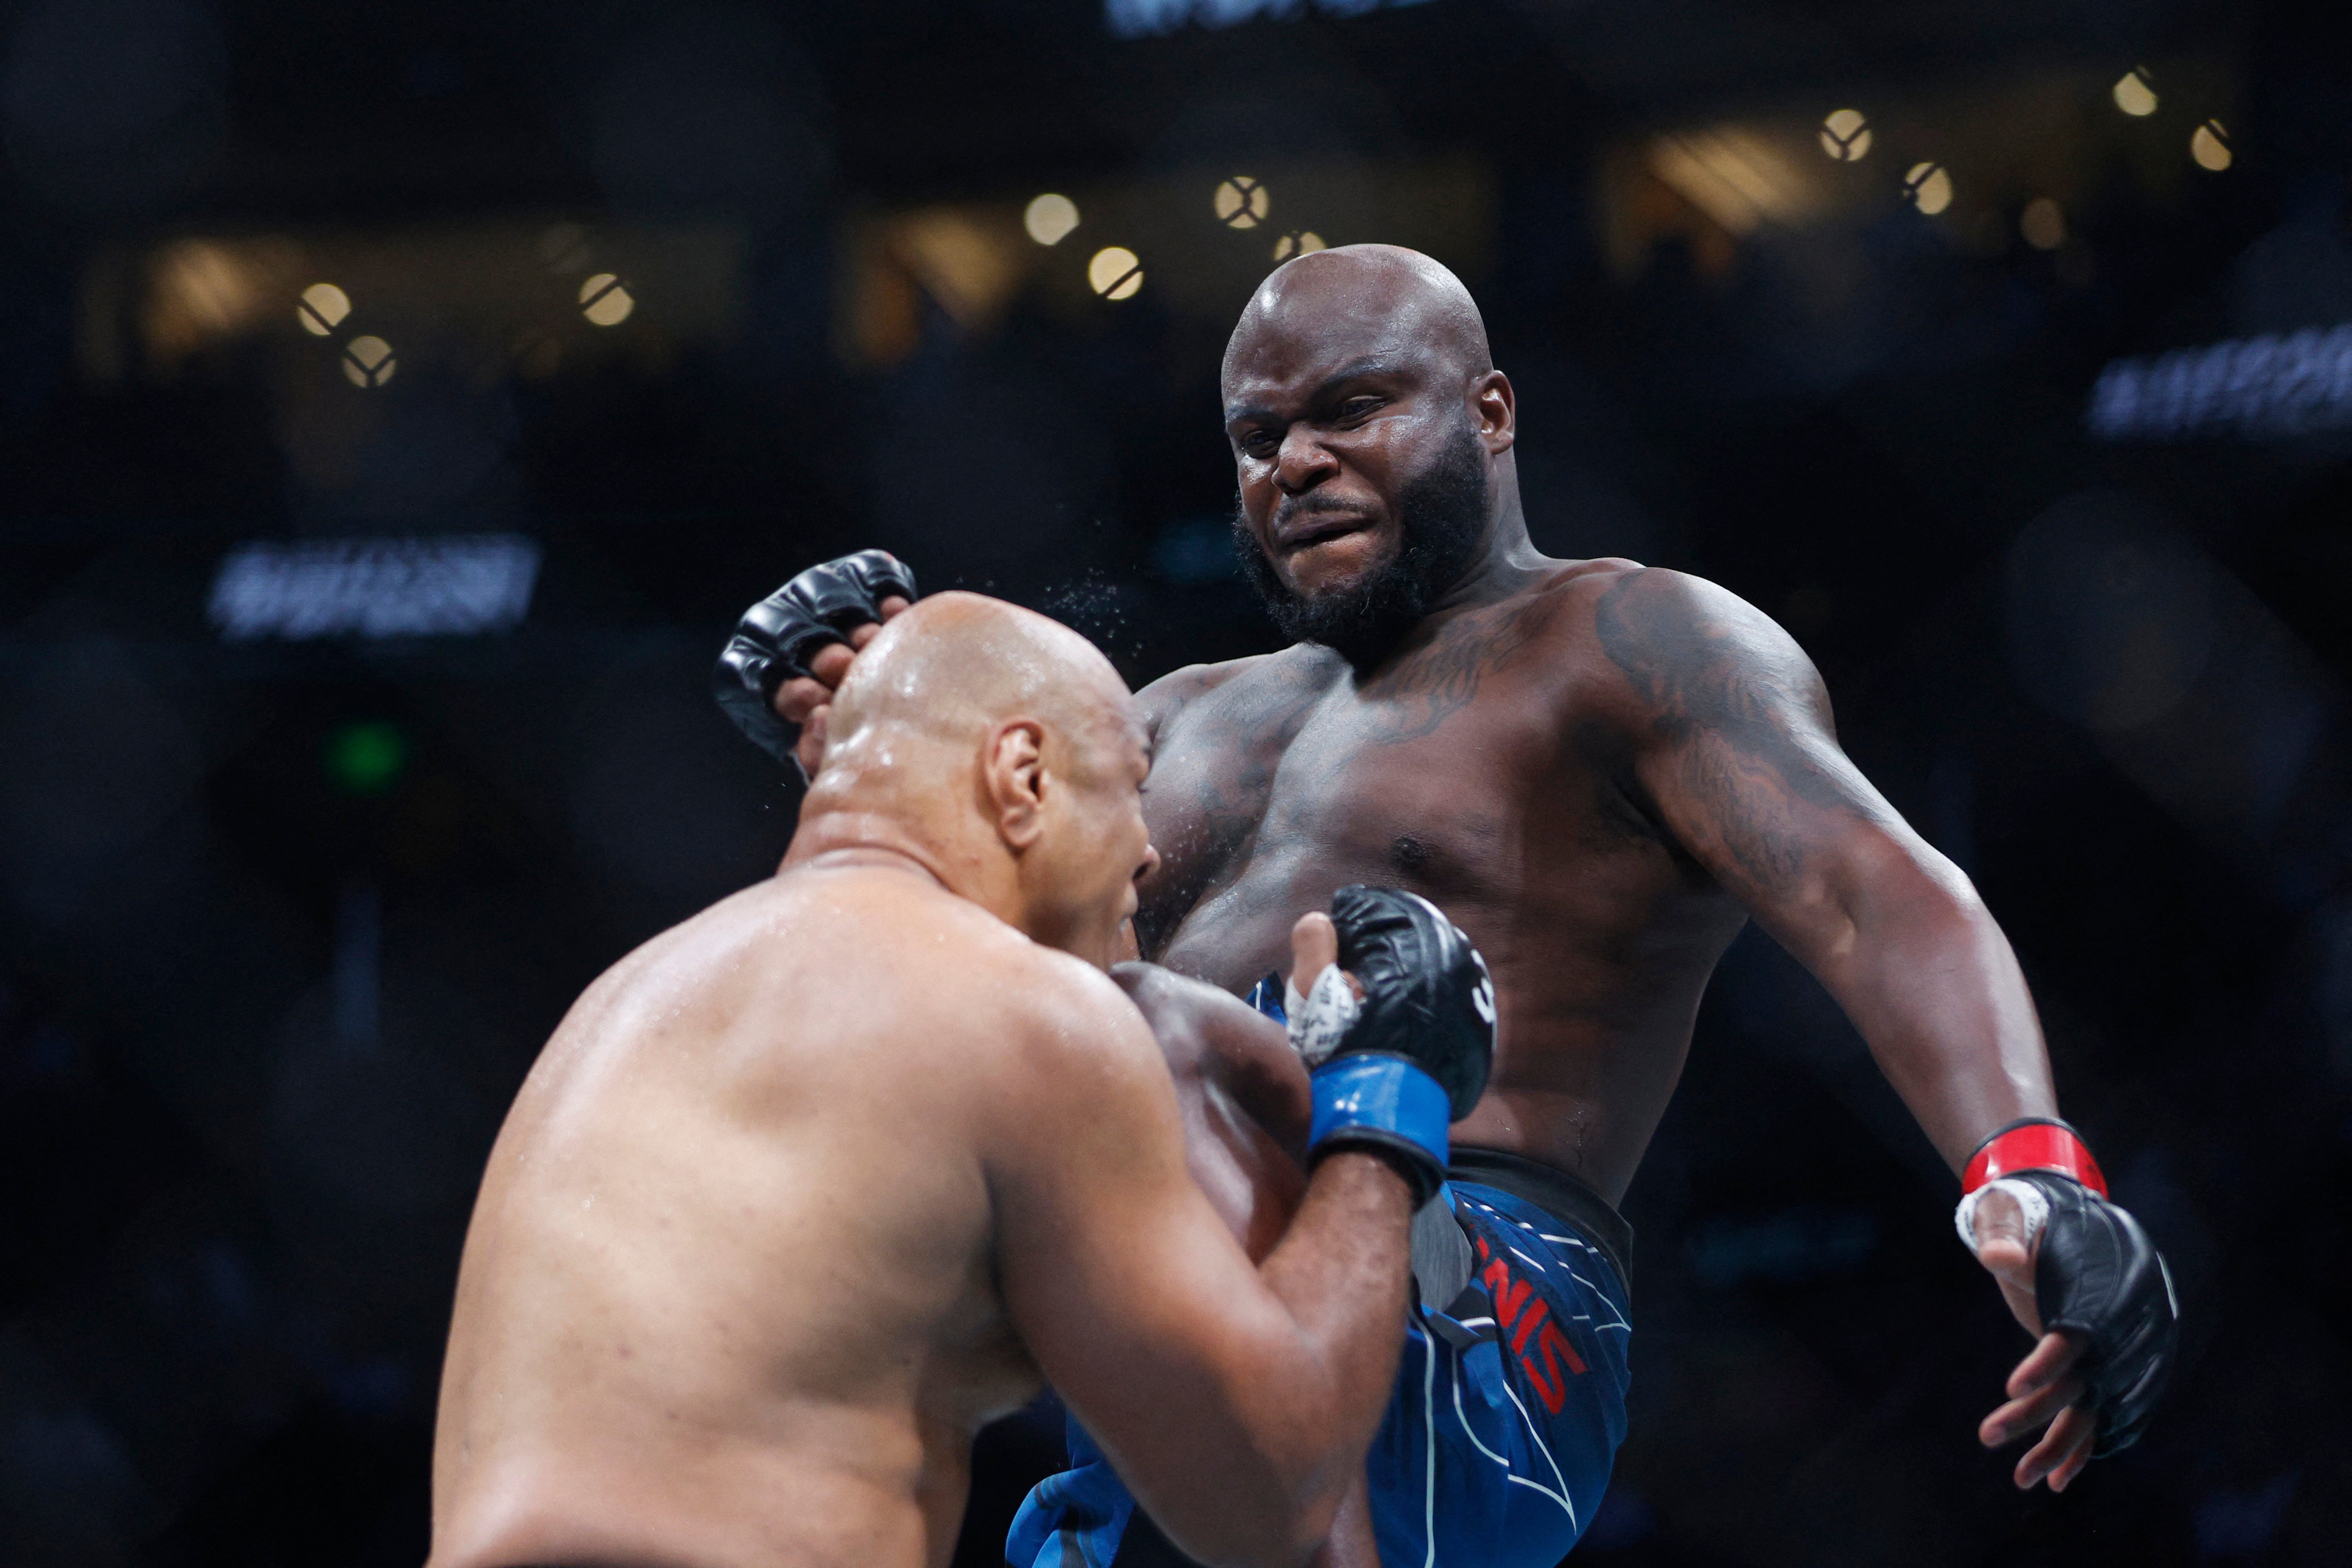 Derrick Lewis drops Marcos Rogerio de Lima with a flying knee before securing an early TKO